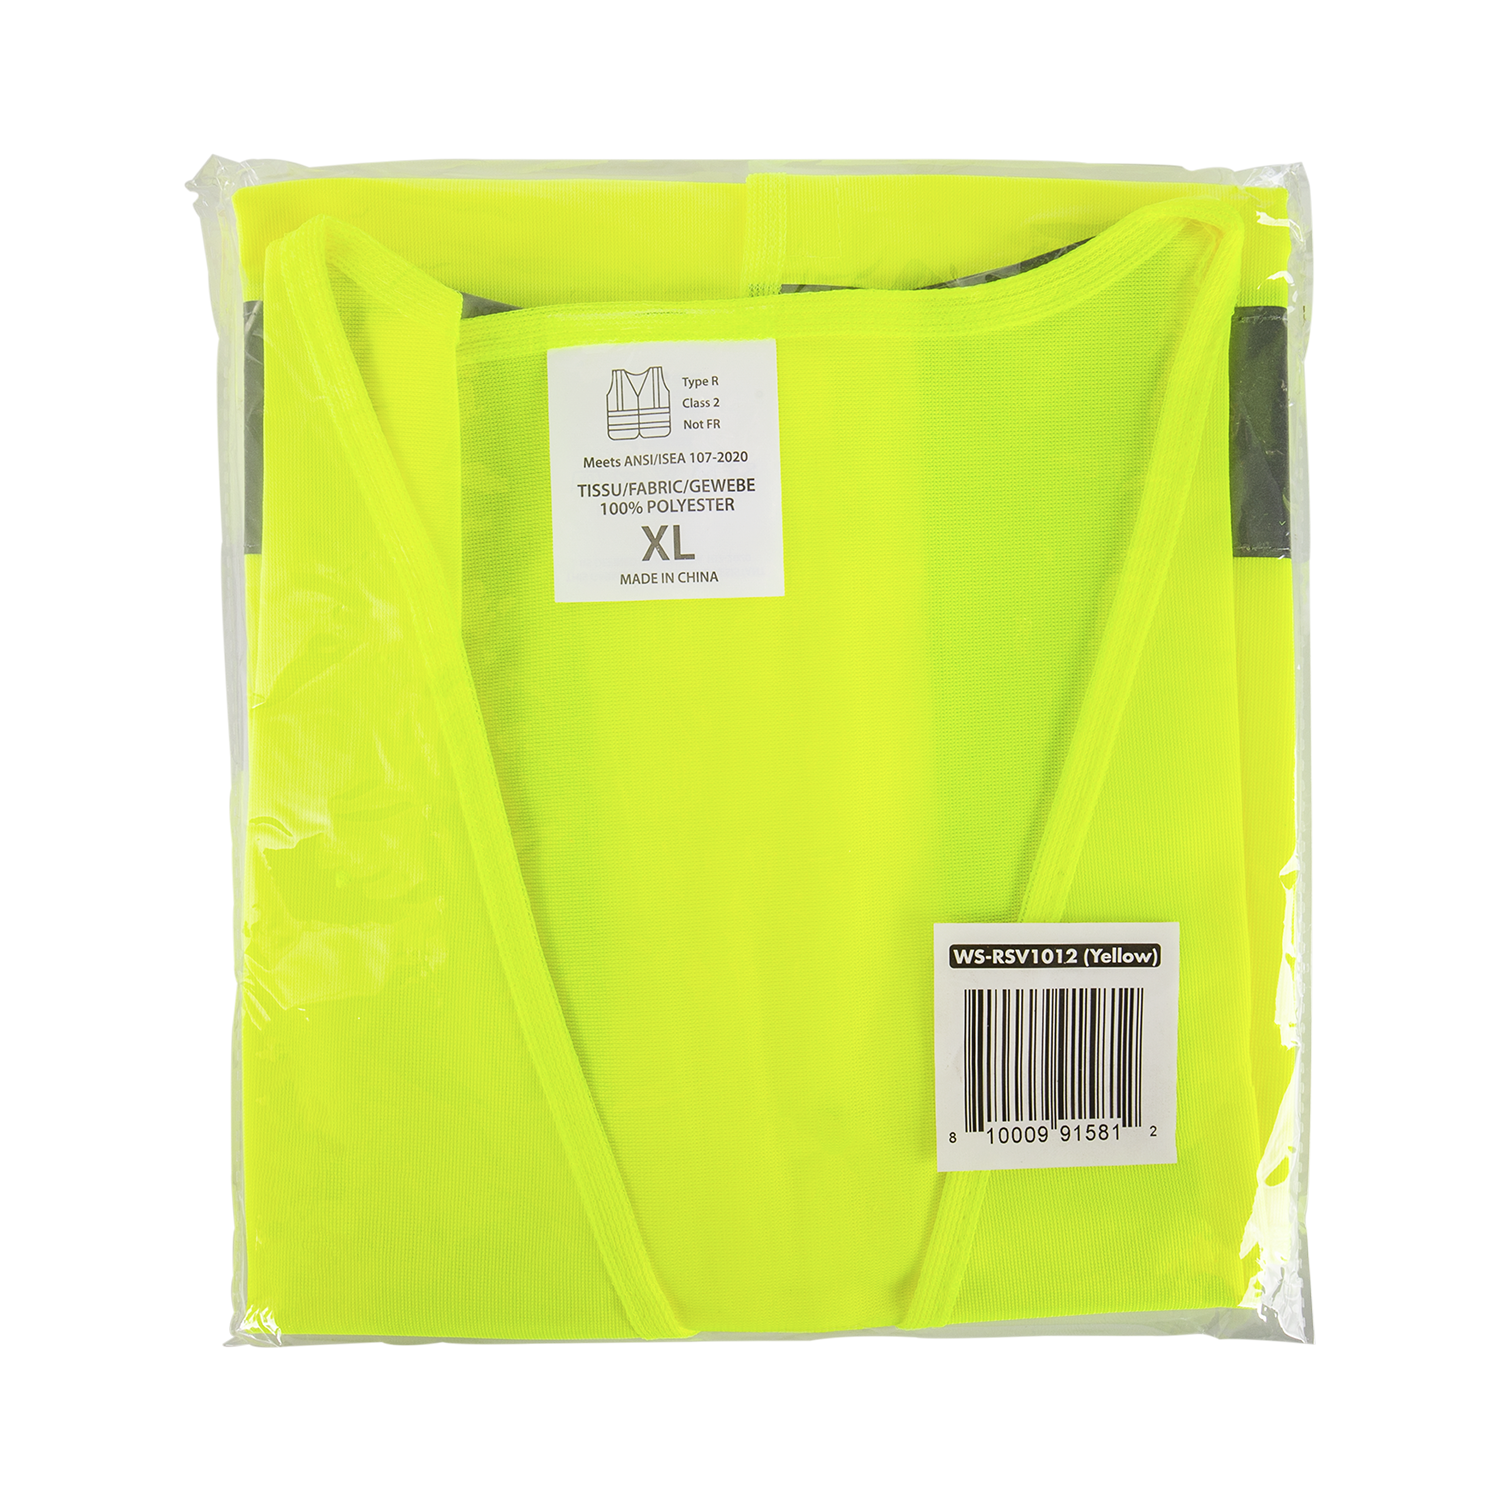 Karat High Visibility Reflective Safety Vest with Velcro Fastening (Yellow), X-Large - 1 pc